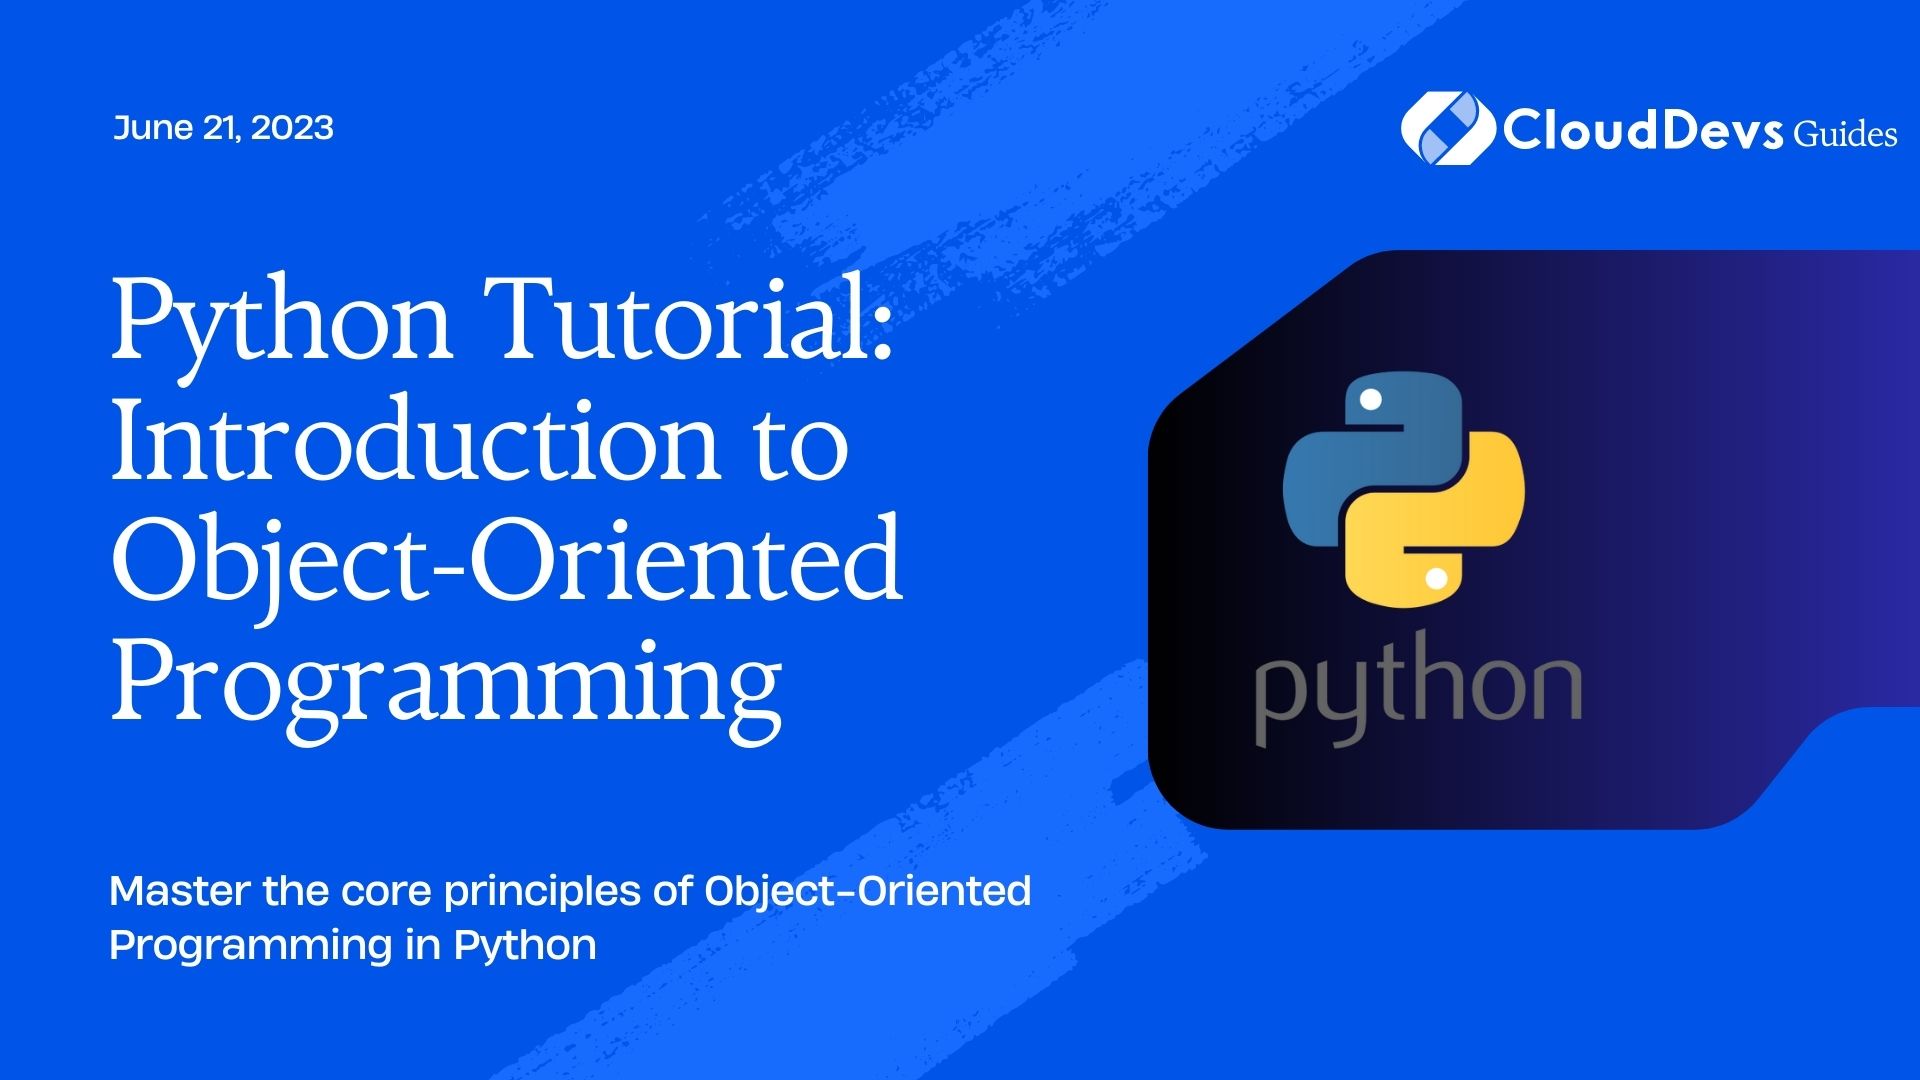 Introduction to Object-Oriented Programming in Python